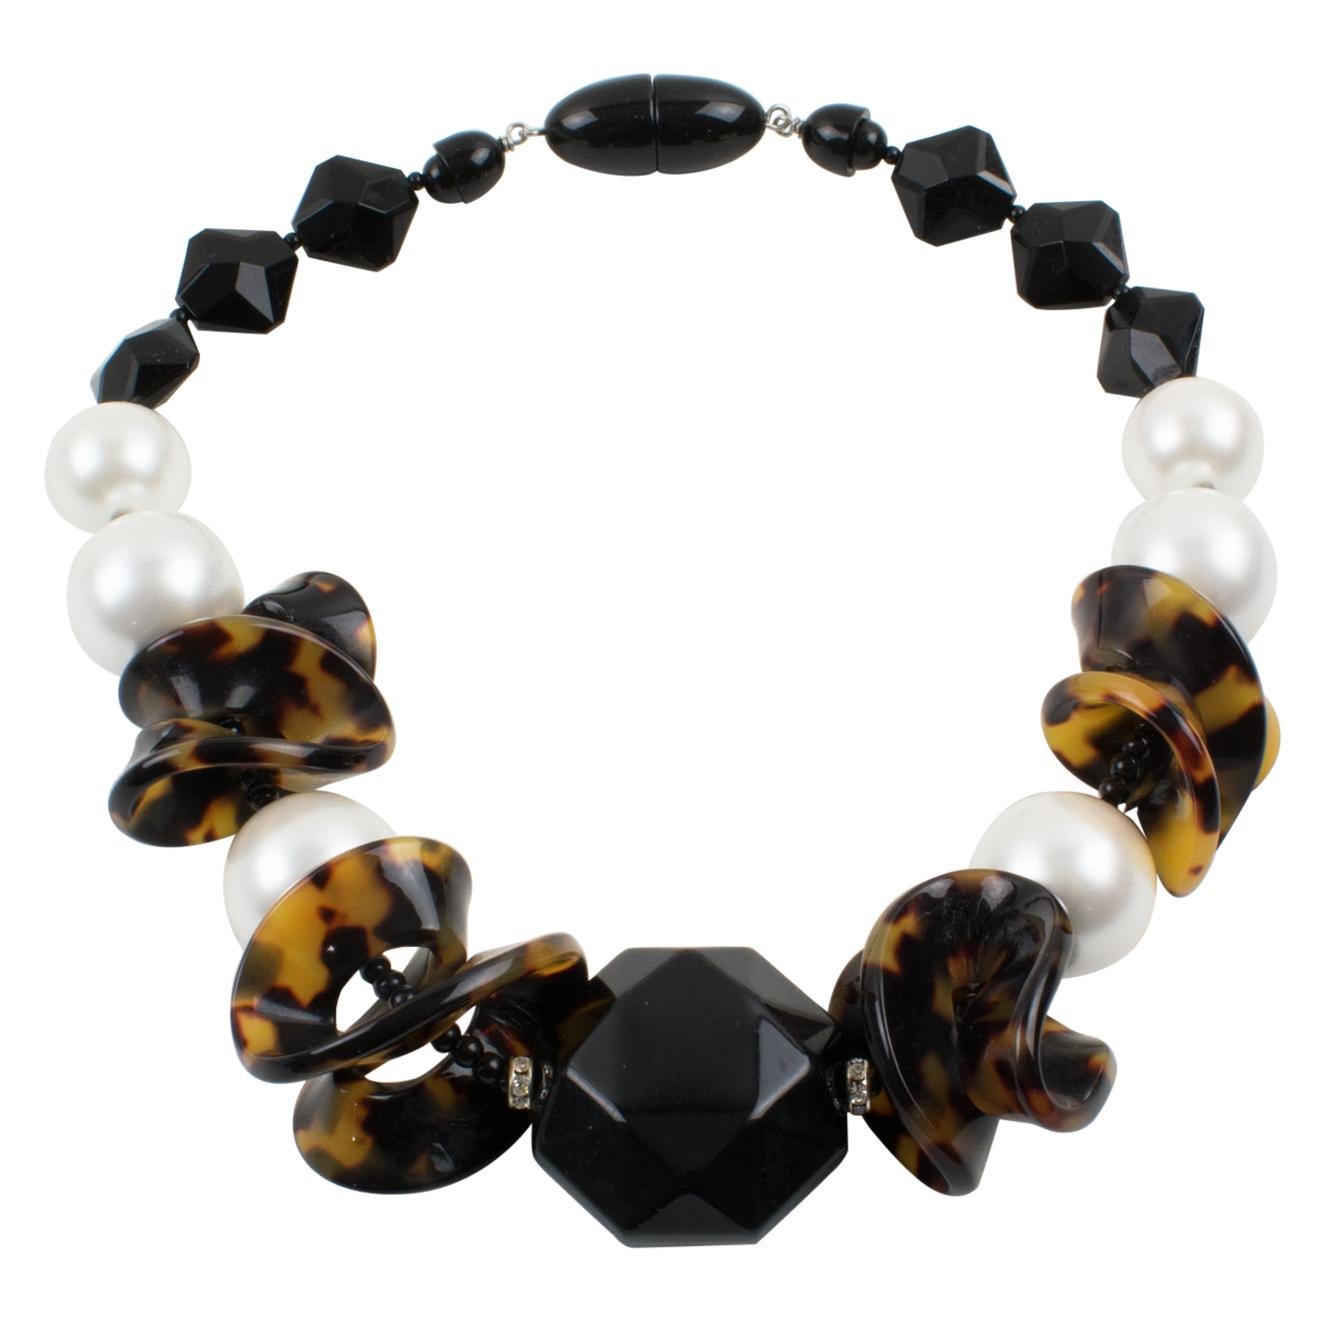 Angela Caputi Tortoise Pearly and Black Lucite Choker Necklace